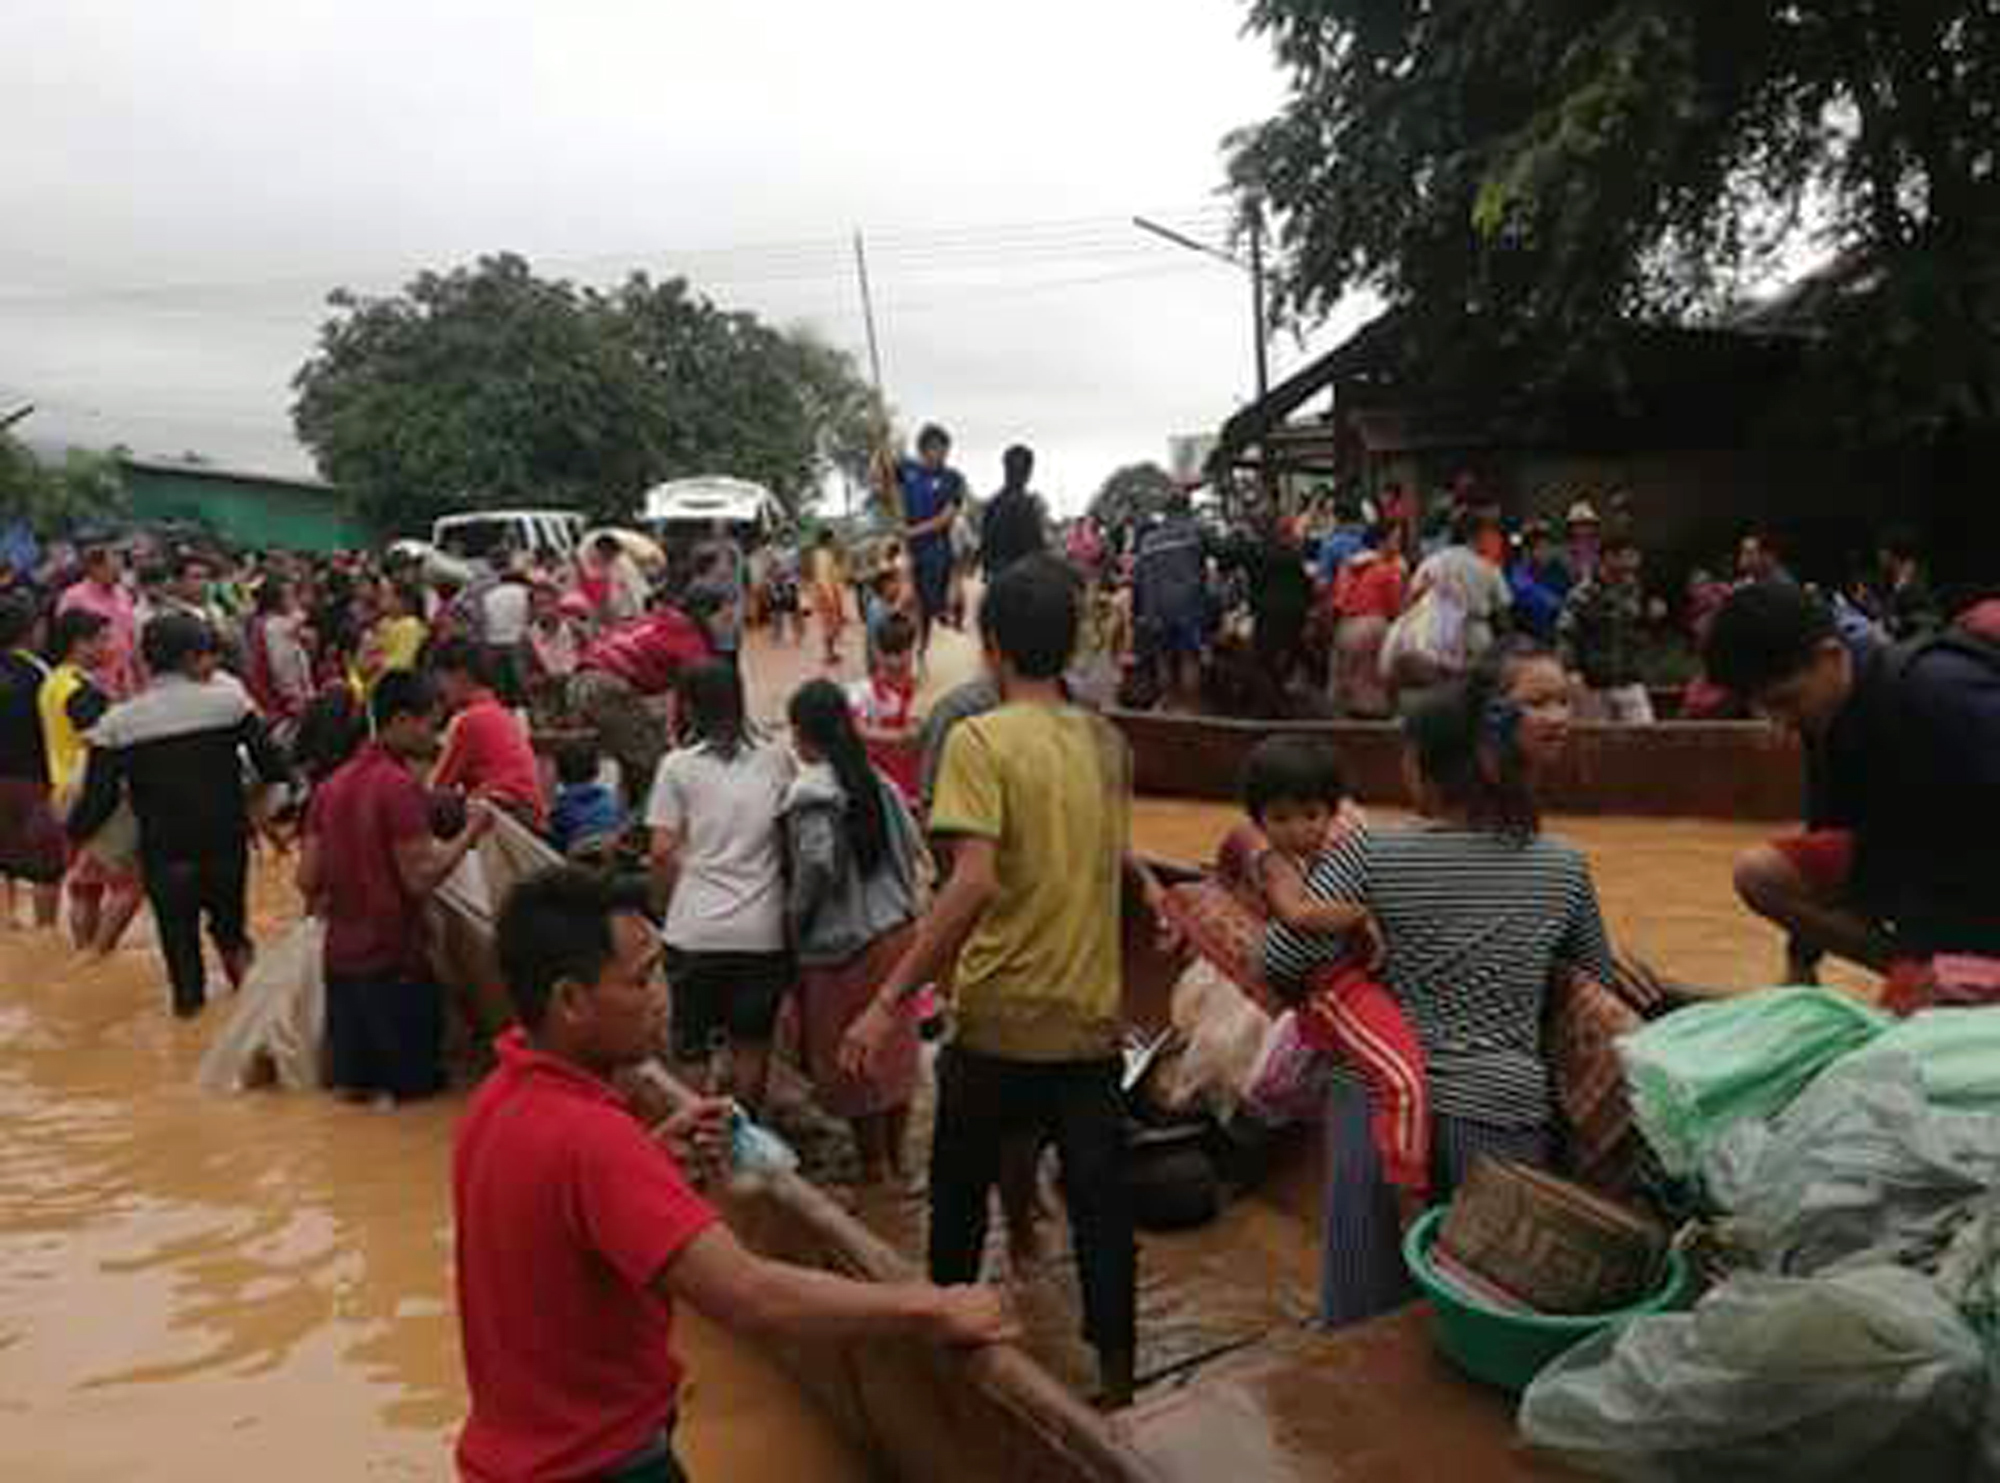 People are evacuated on July 24, 2018 after a dam collapsed in Laos. (Attapeu TV/AP)